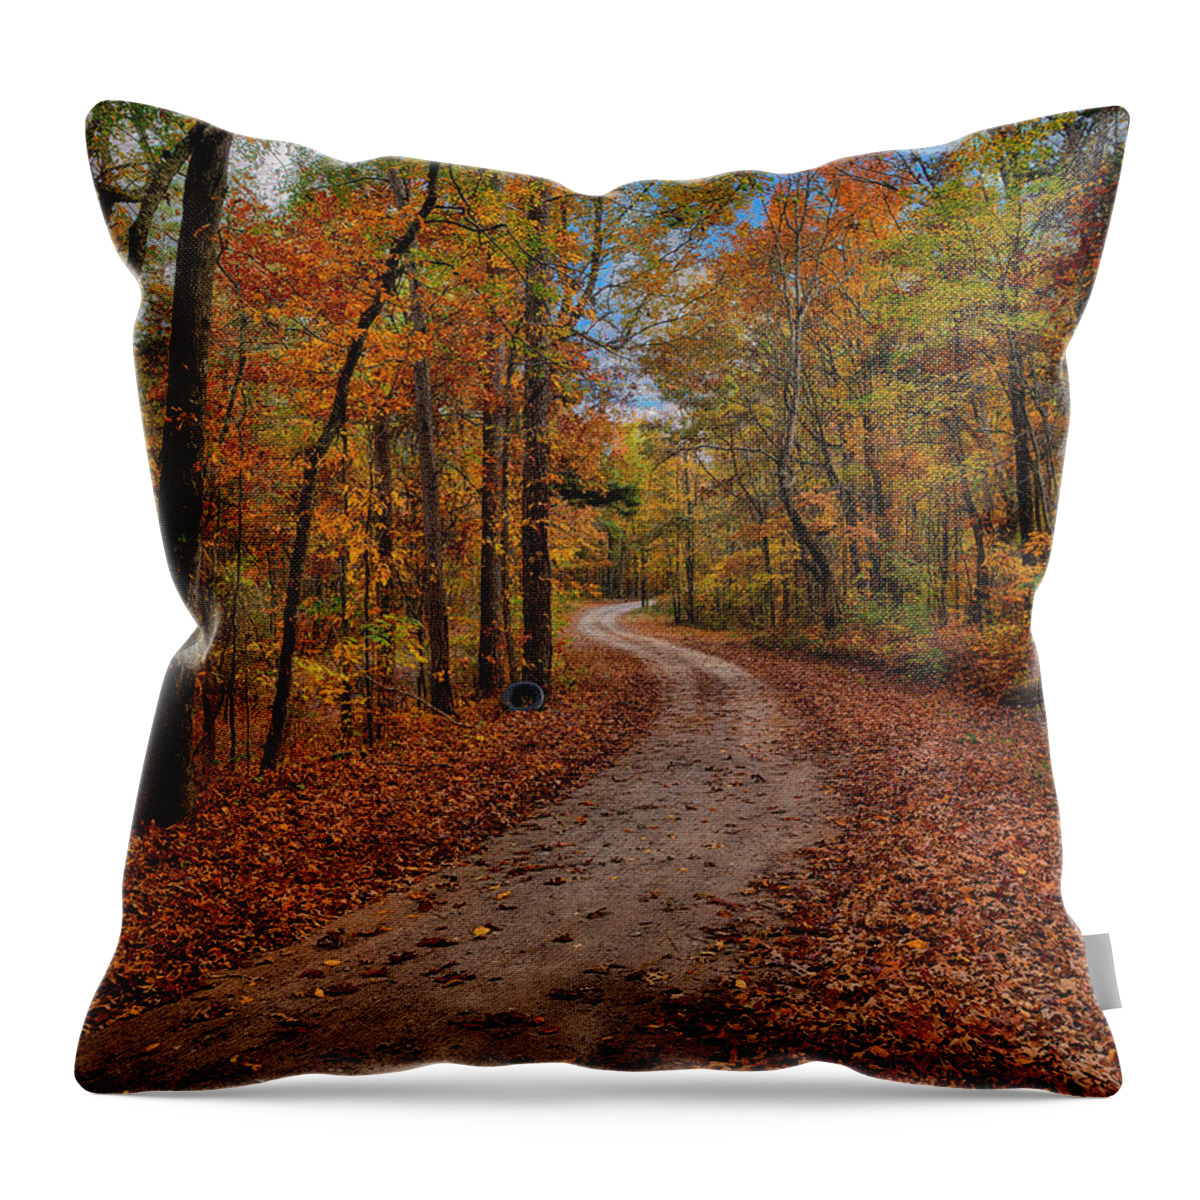 Country Road Throw Pillow featuring the photograph Country Road II by Greg Norrell